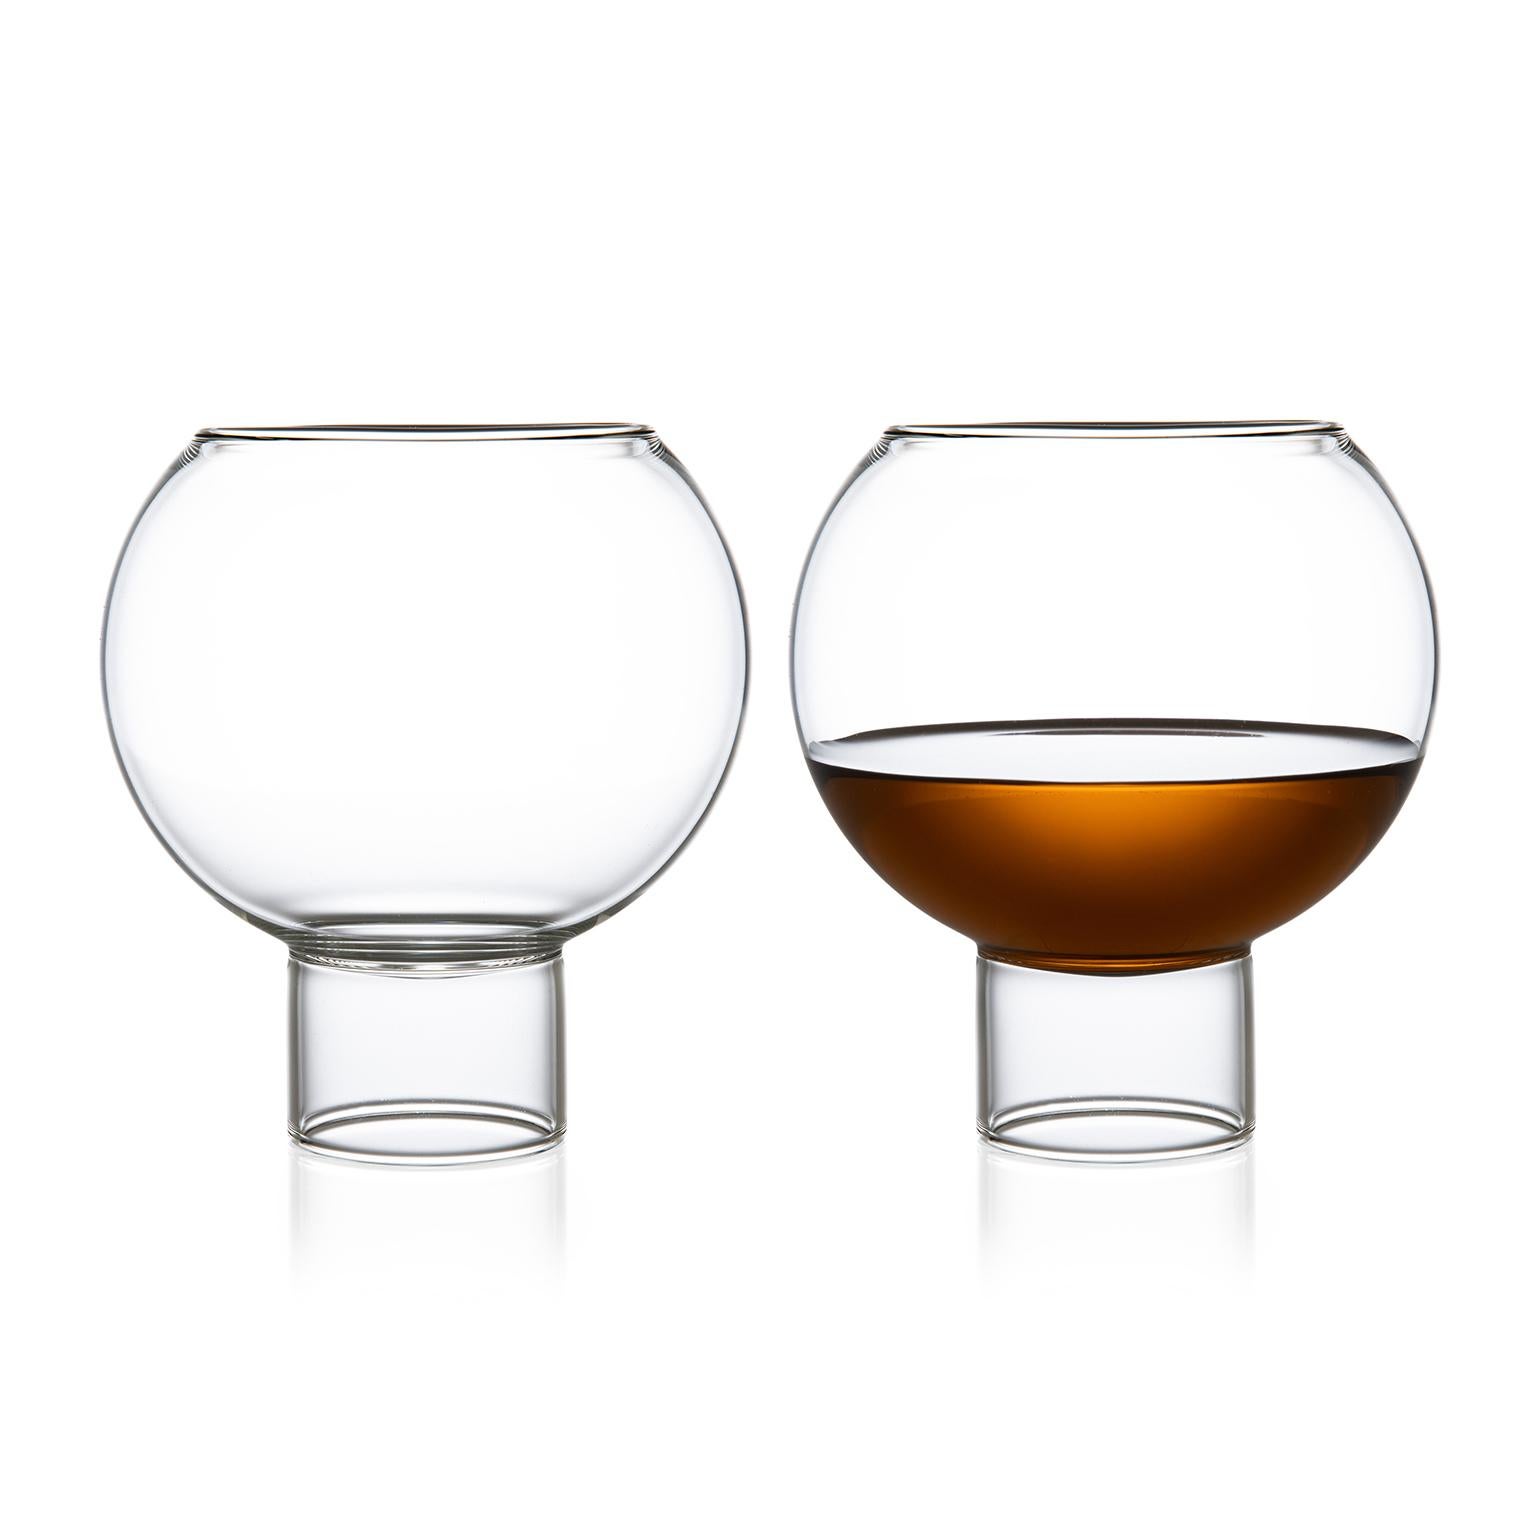 Tulip low medium - set of two

The tulip collection was inspired by the small bistro wine glasses found in European bars and cafes. The bowl of the glass sits down into the cylindrical stem, highlighting the intersection between the two. With